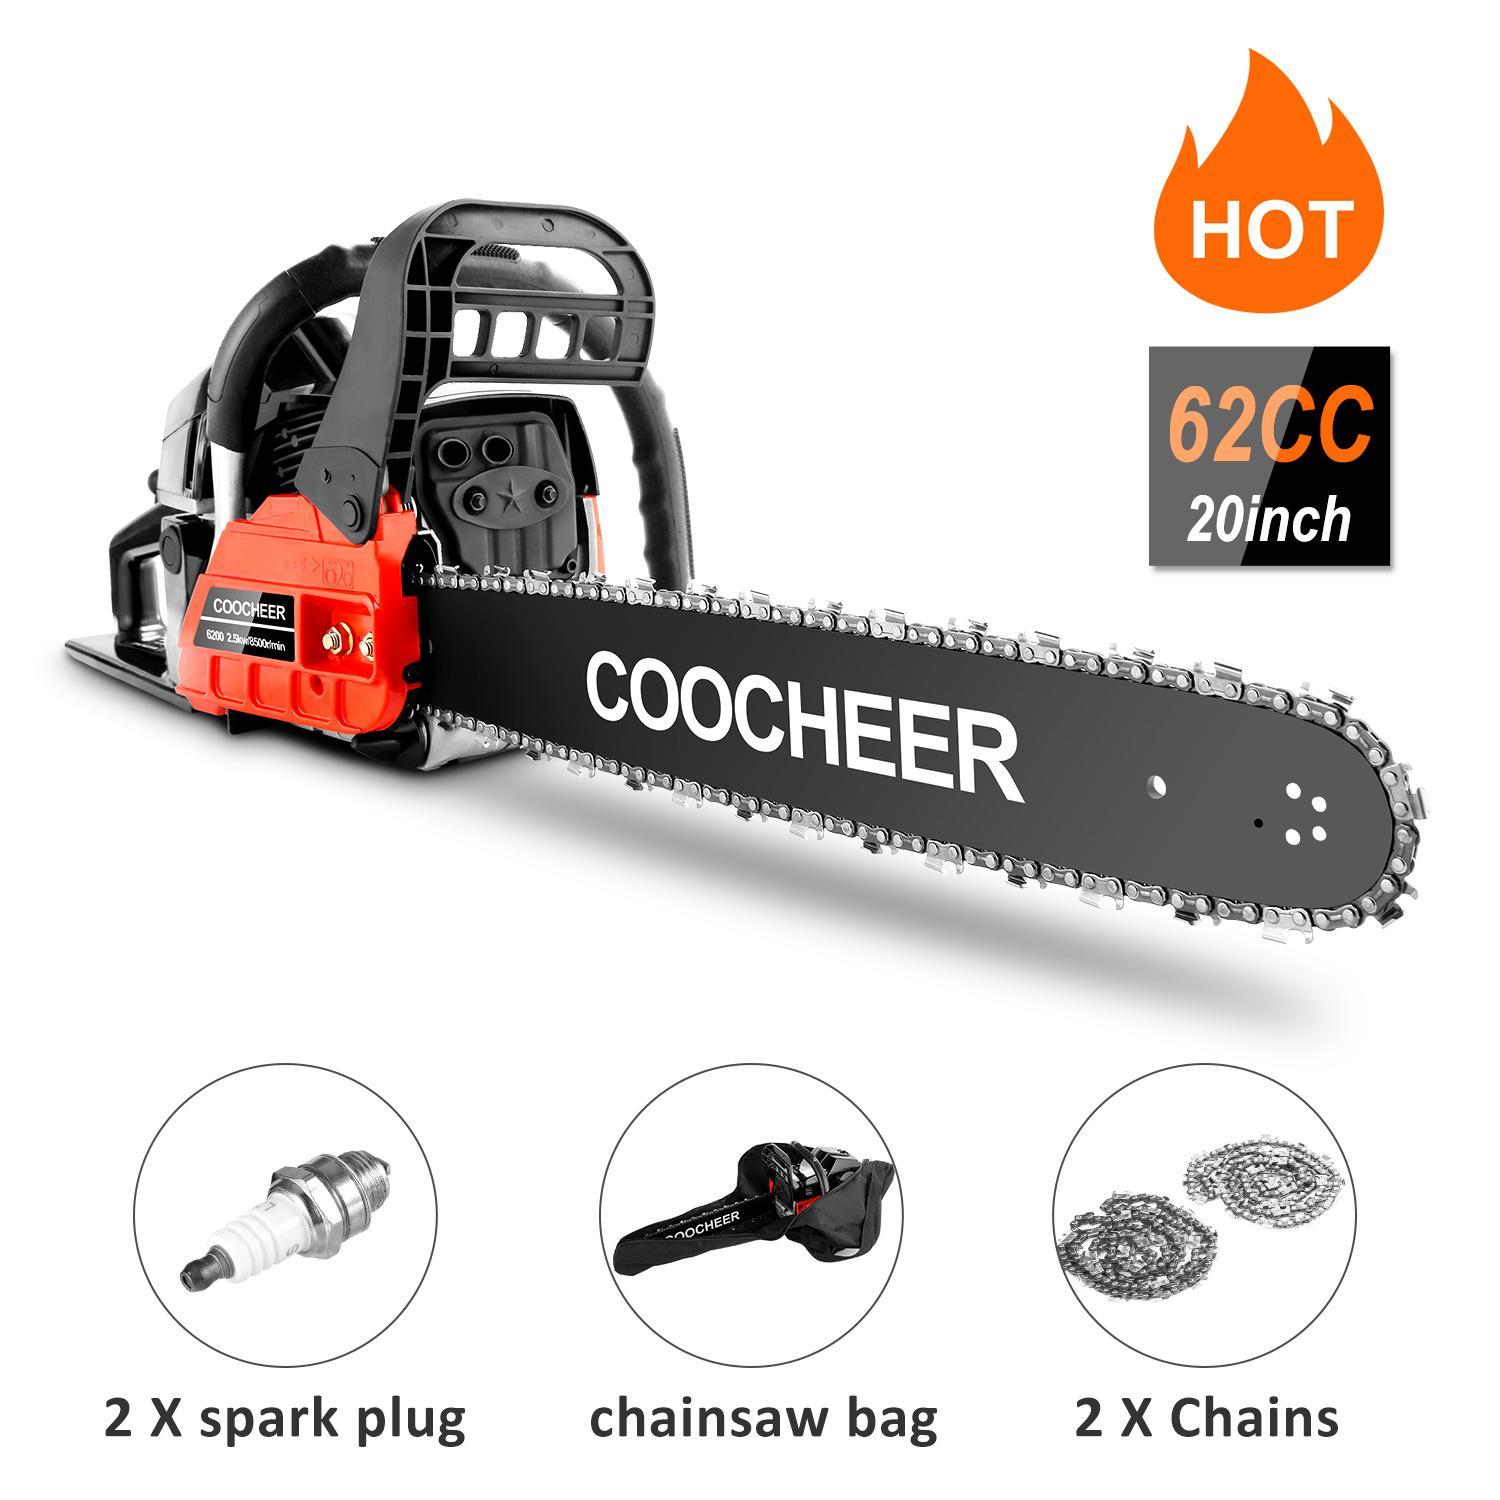 Generic 62CC 3.5HP 20'' Chainsaw Gasoline Gas Powered,2-Stroke Chain Saws with Tool Kit for Cutting Trees,Wood Handheld Cordless Engine